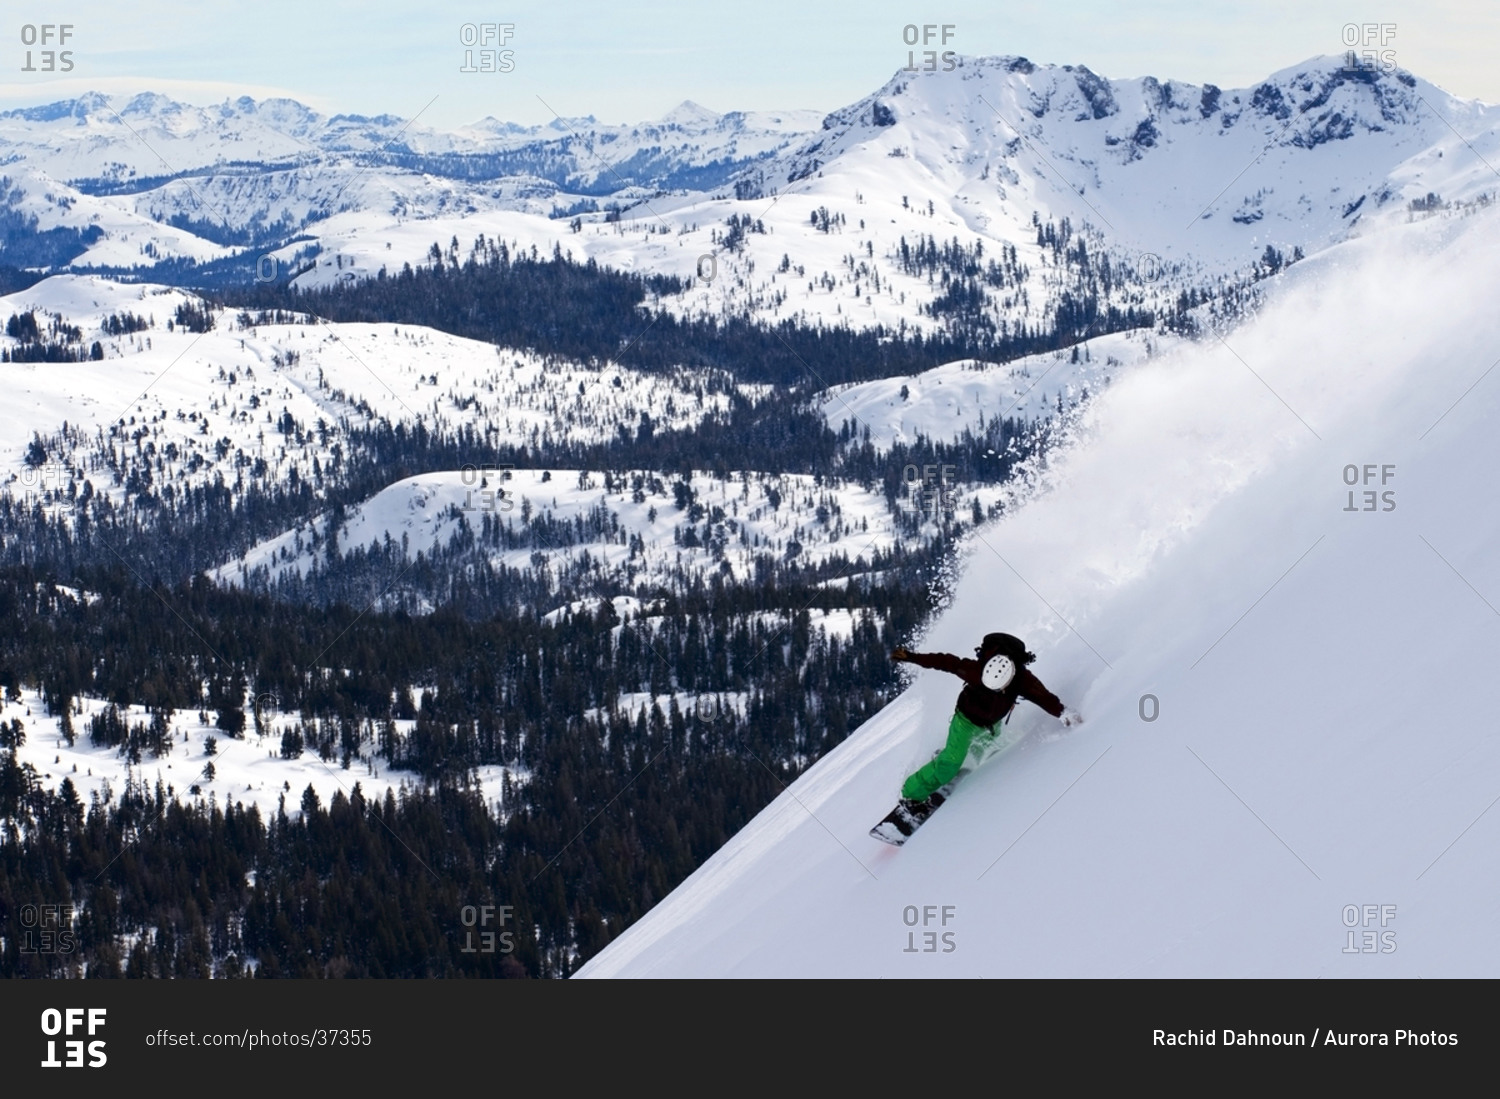 A snowboarder rips a huge turn in deep powder on Red Lake Peak off of Carson Pass near Lake Tahoe, CA.